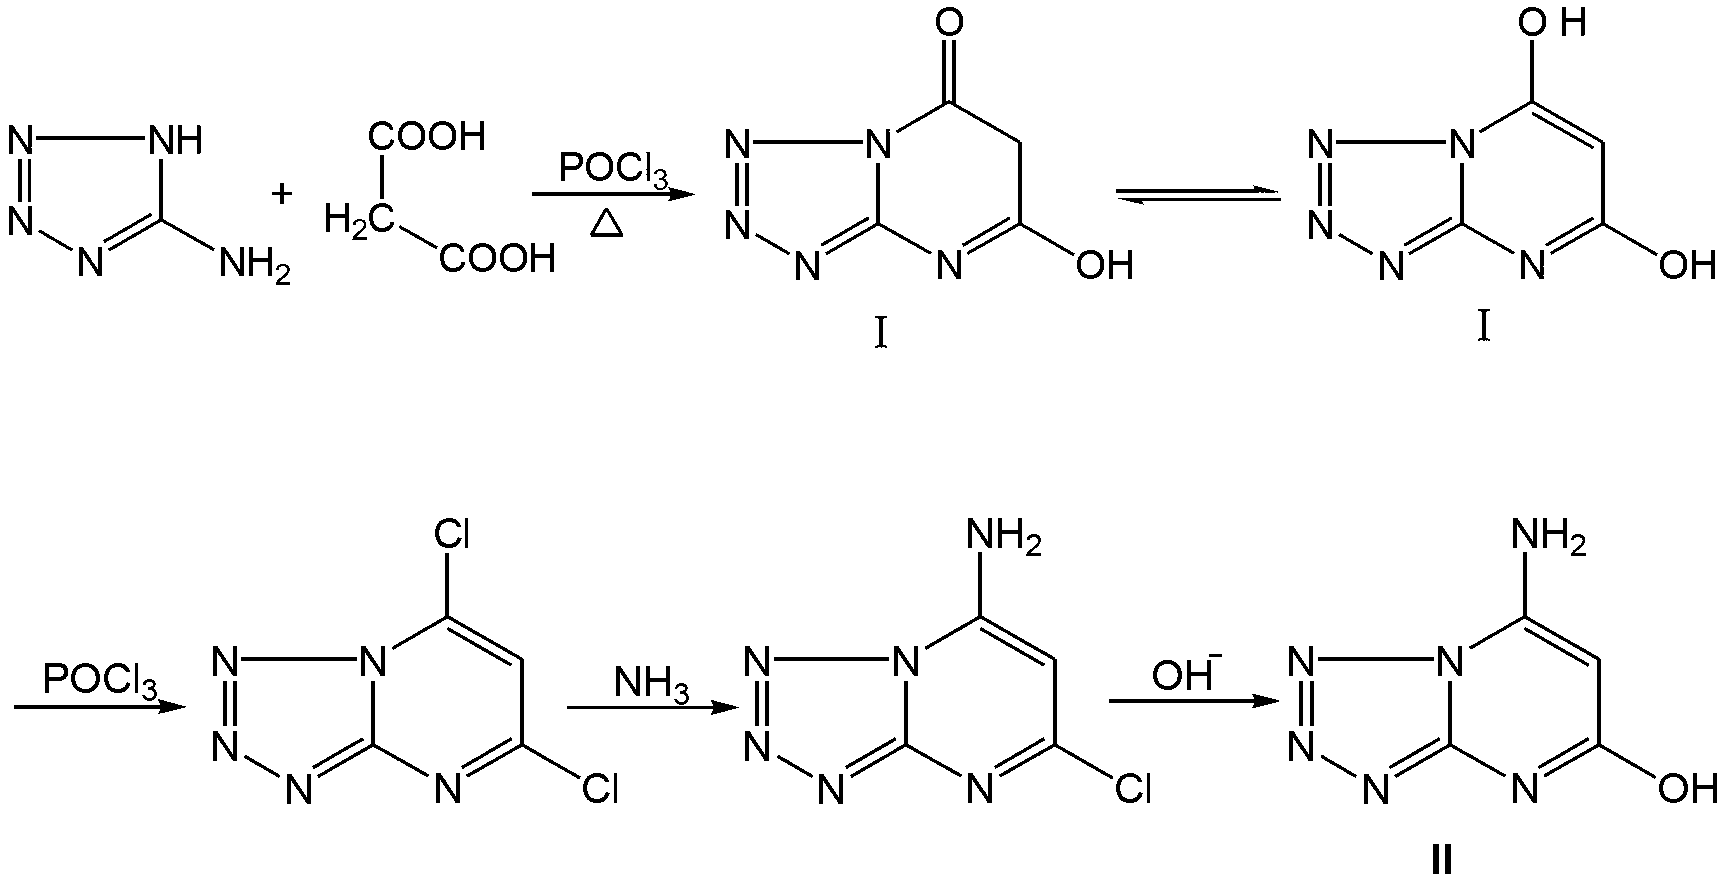 7-amino-tetrazole[1,5-a] pyrimidine-5-alcohol(compound ii) and its synthetic route